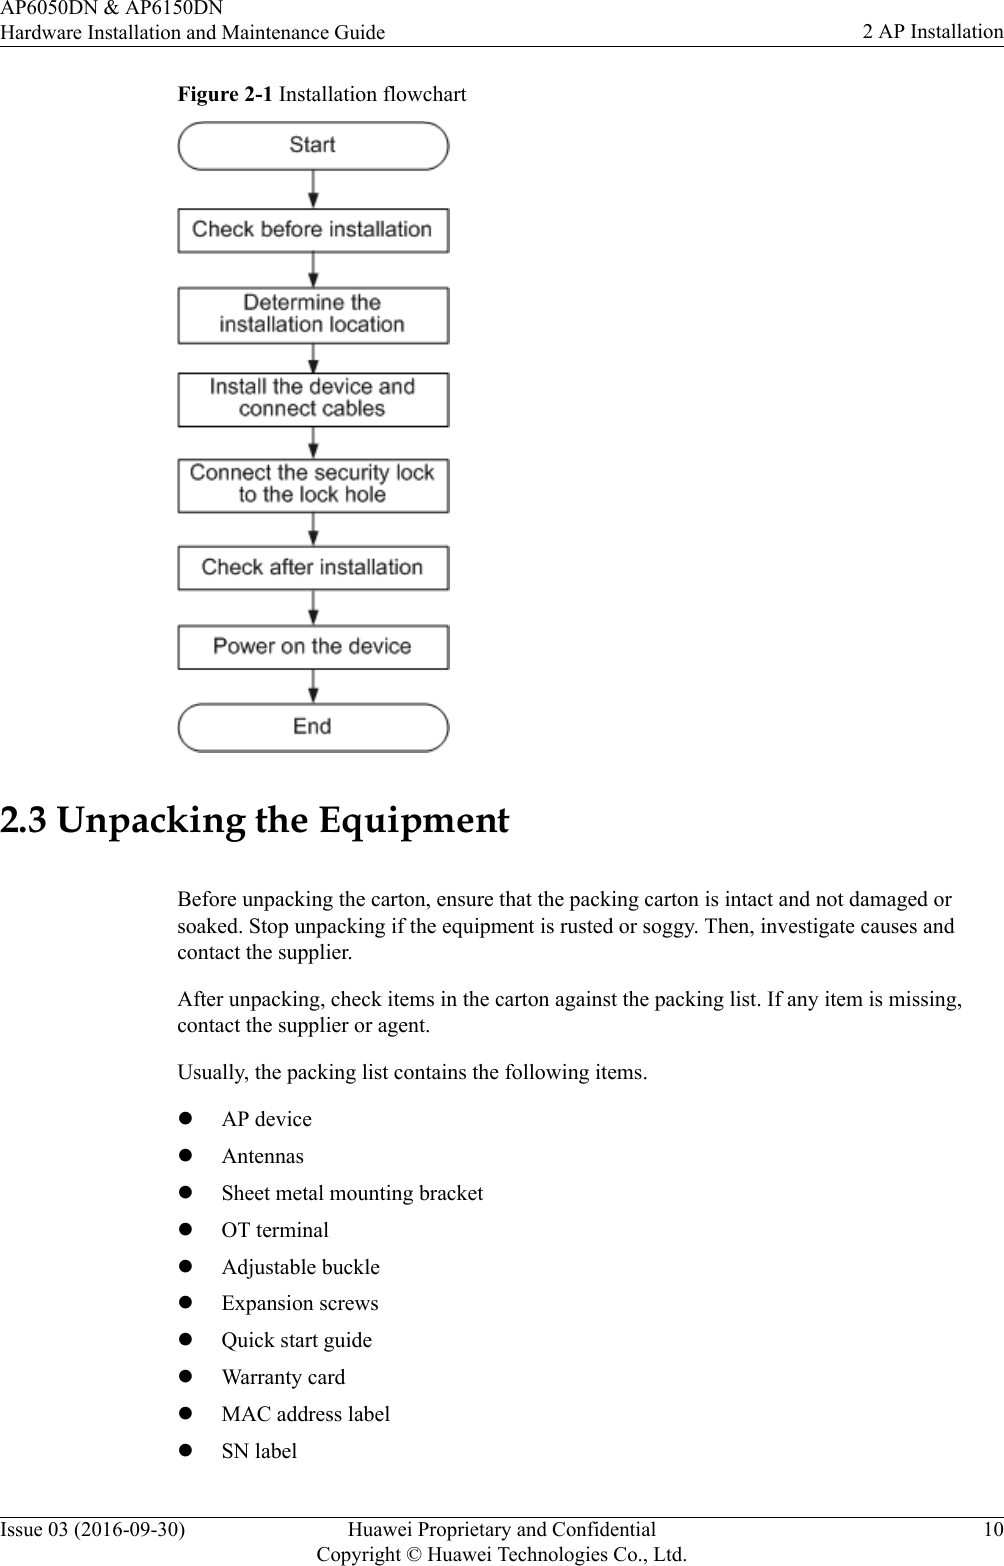 Figure 2-1 Installation flowchart2.3 Unpacking the EquipmentBefore unpacking the carton, ensure that the packing carton is intact and not damaged orsoaked. Stop unpacking if the equipment is rusted or soggy. Then, investigate causes andcontact the supplier.After unpacking, check items in the carton against the packing list. If any item is missing,contact the supplier or agent.Usually, the packing list contains the following items.lAP devicelAntennaslSheet metal mounting bracketlOT terminallAdjustable bucklelExpansion screwslQuick start guidelWarranty cardlMAC address labellSN labelAP6050DN &amp; AP6150DNHardware Installation and Maintenance Guide 2 AP InstallationIssue 03 (2016-09-30) Huawei Proprietary and ConfidentialCopyright © Huawei Technologies Co., Ltd.10